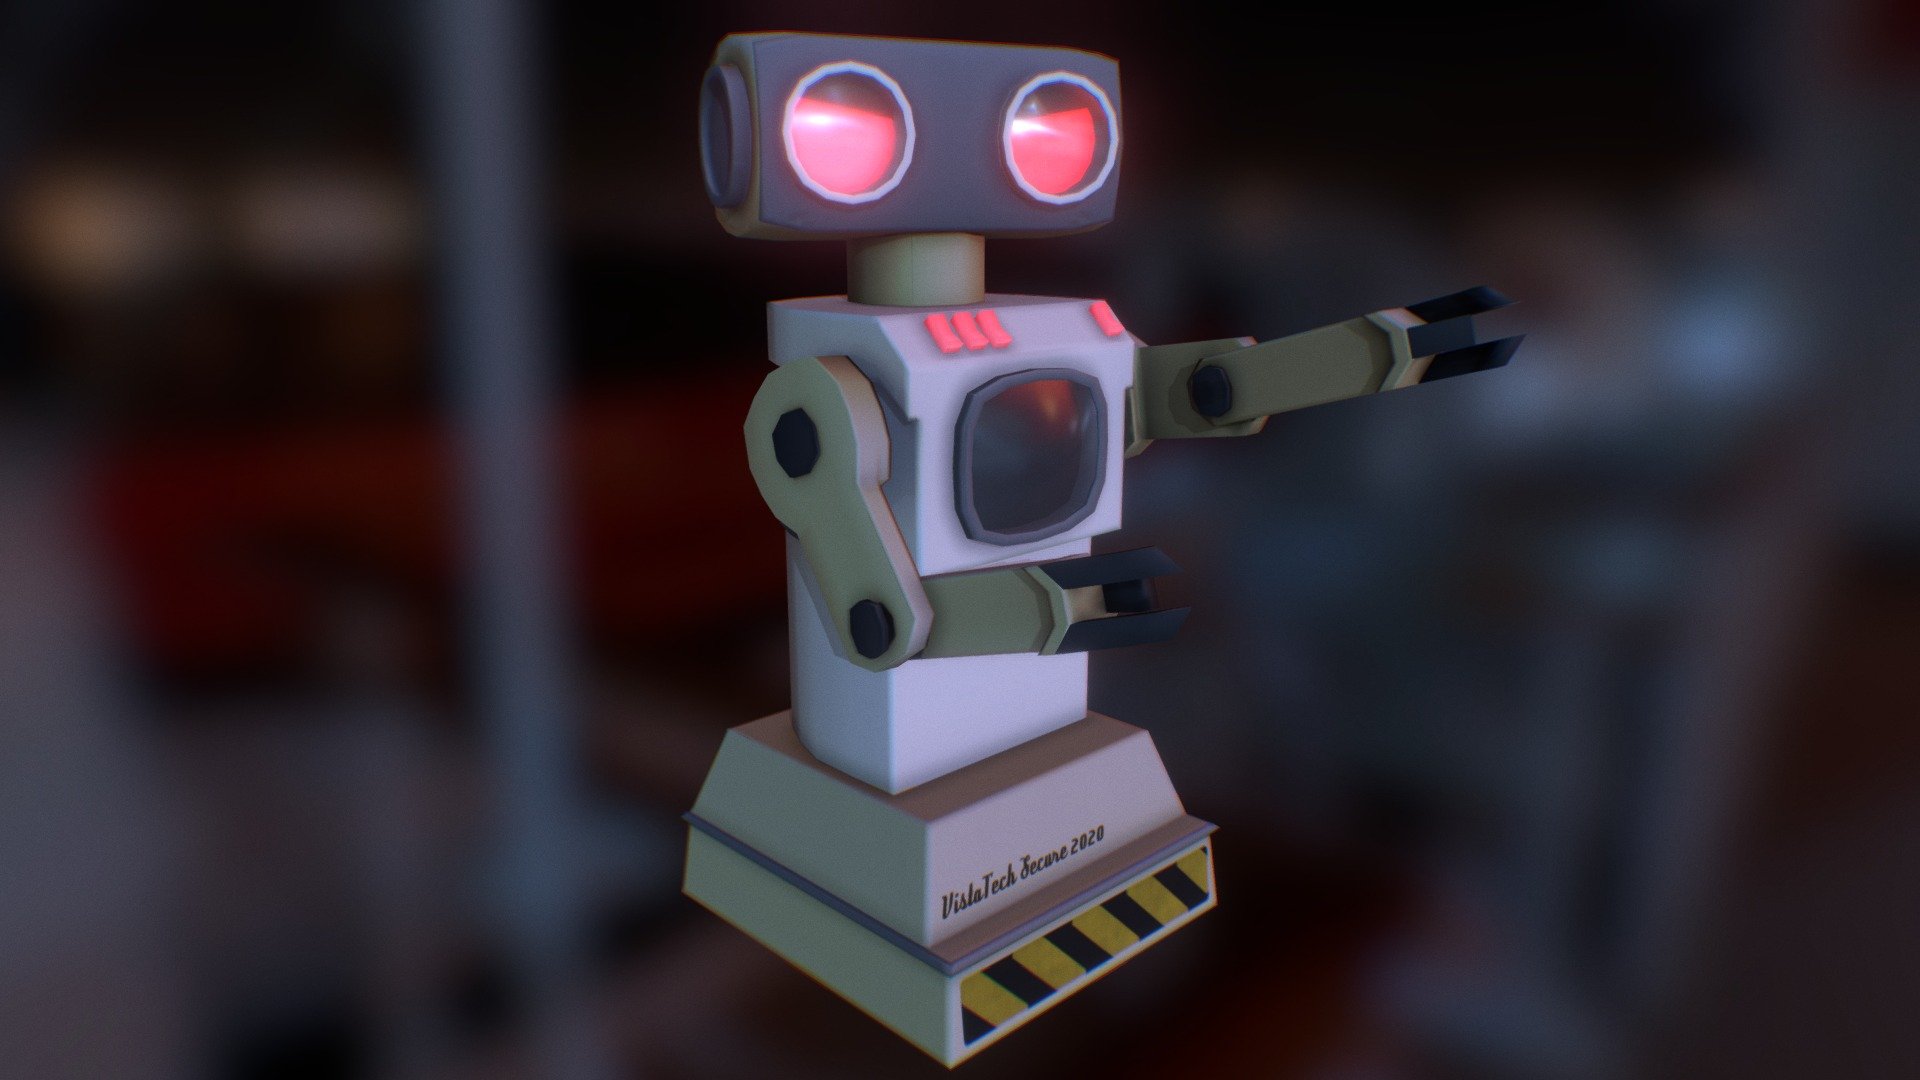 Cute (but evil) Retro Robot - View in VR